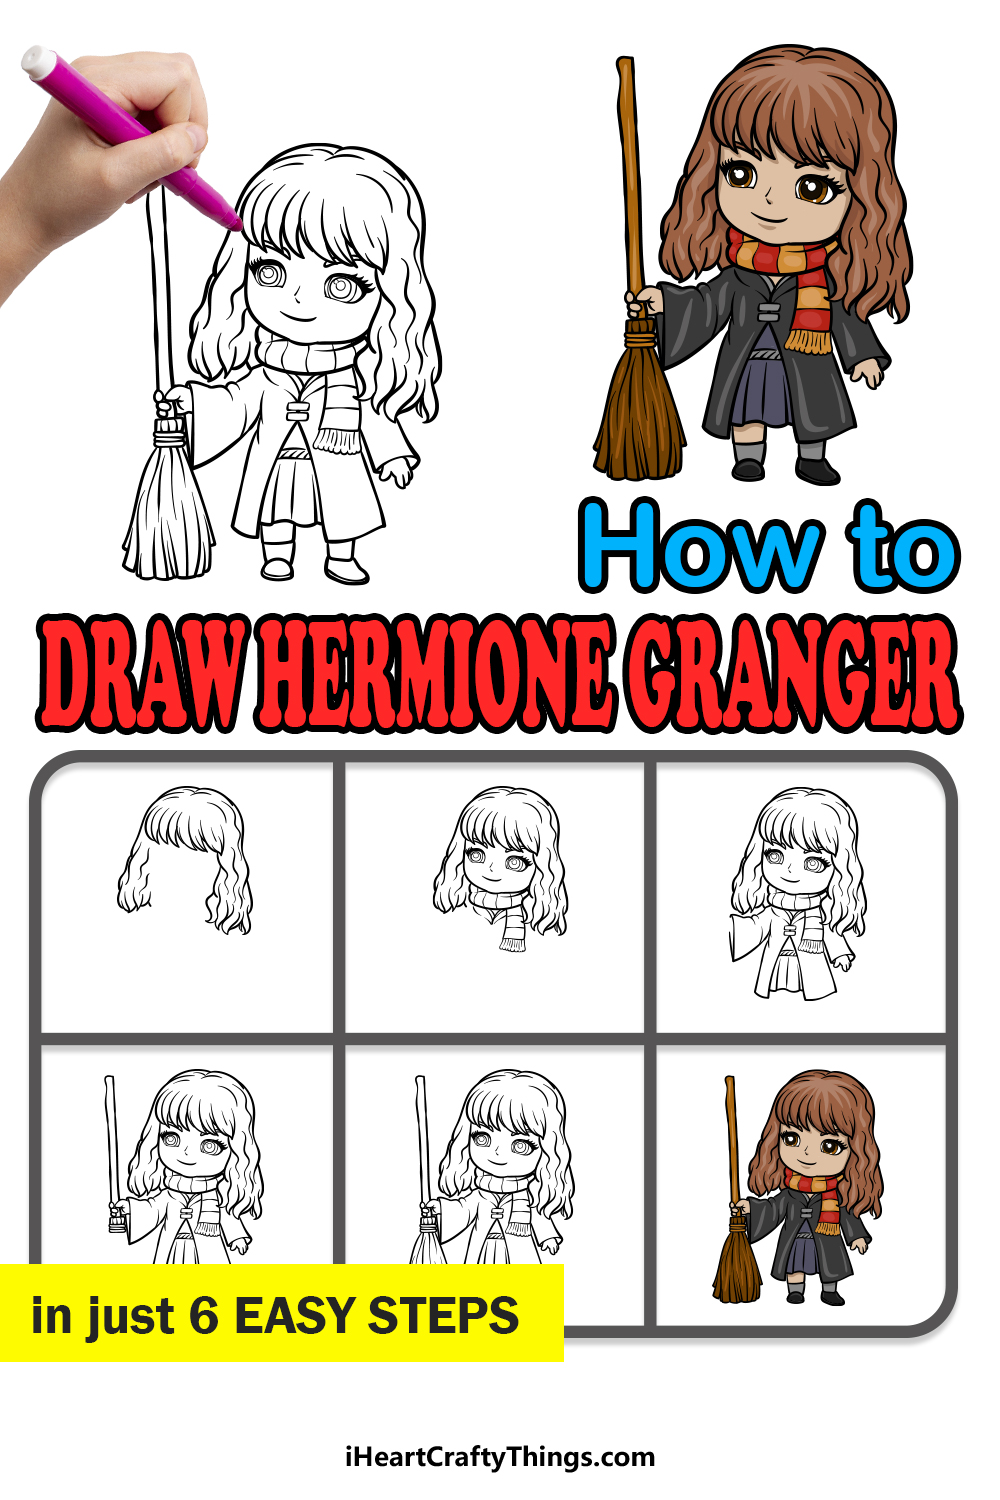 how to draw Hermione Granger in 6 easy steps